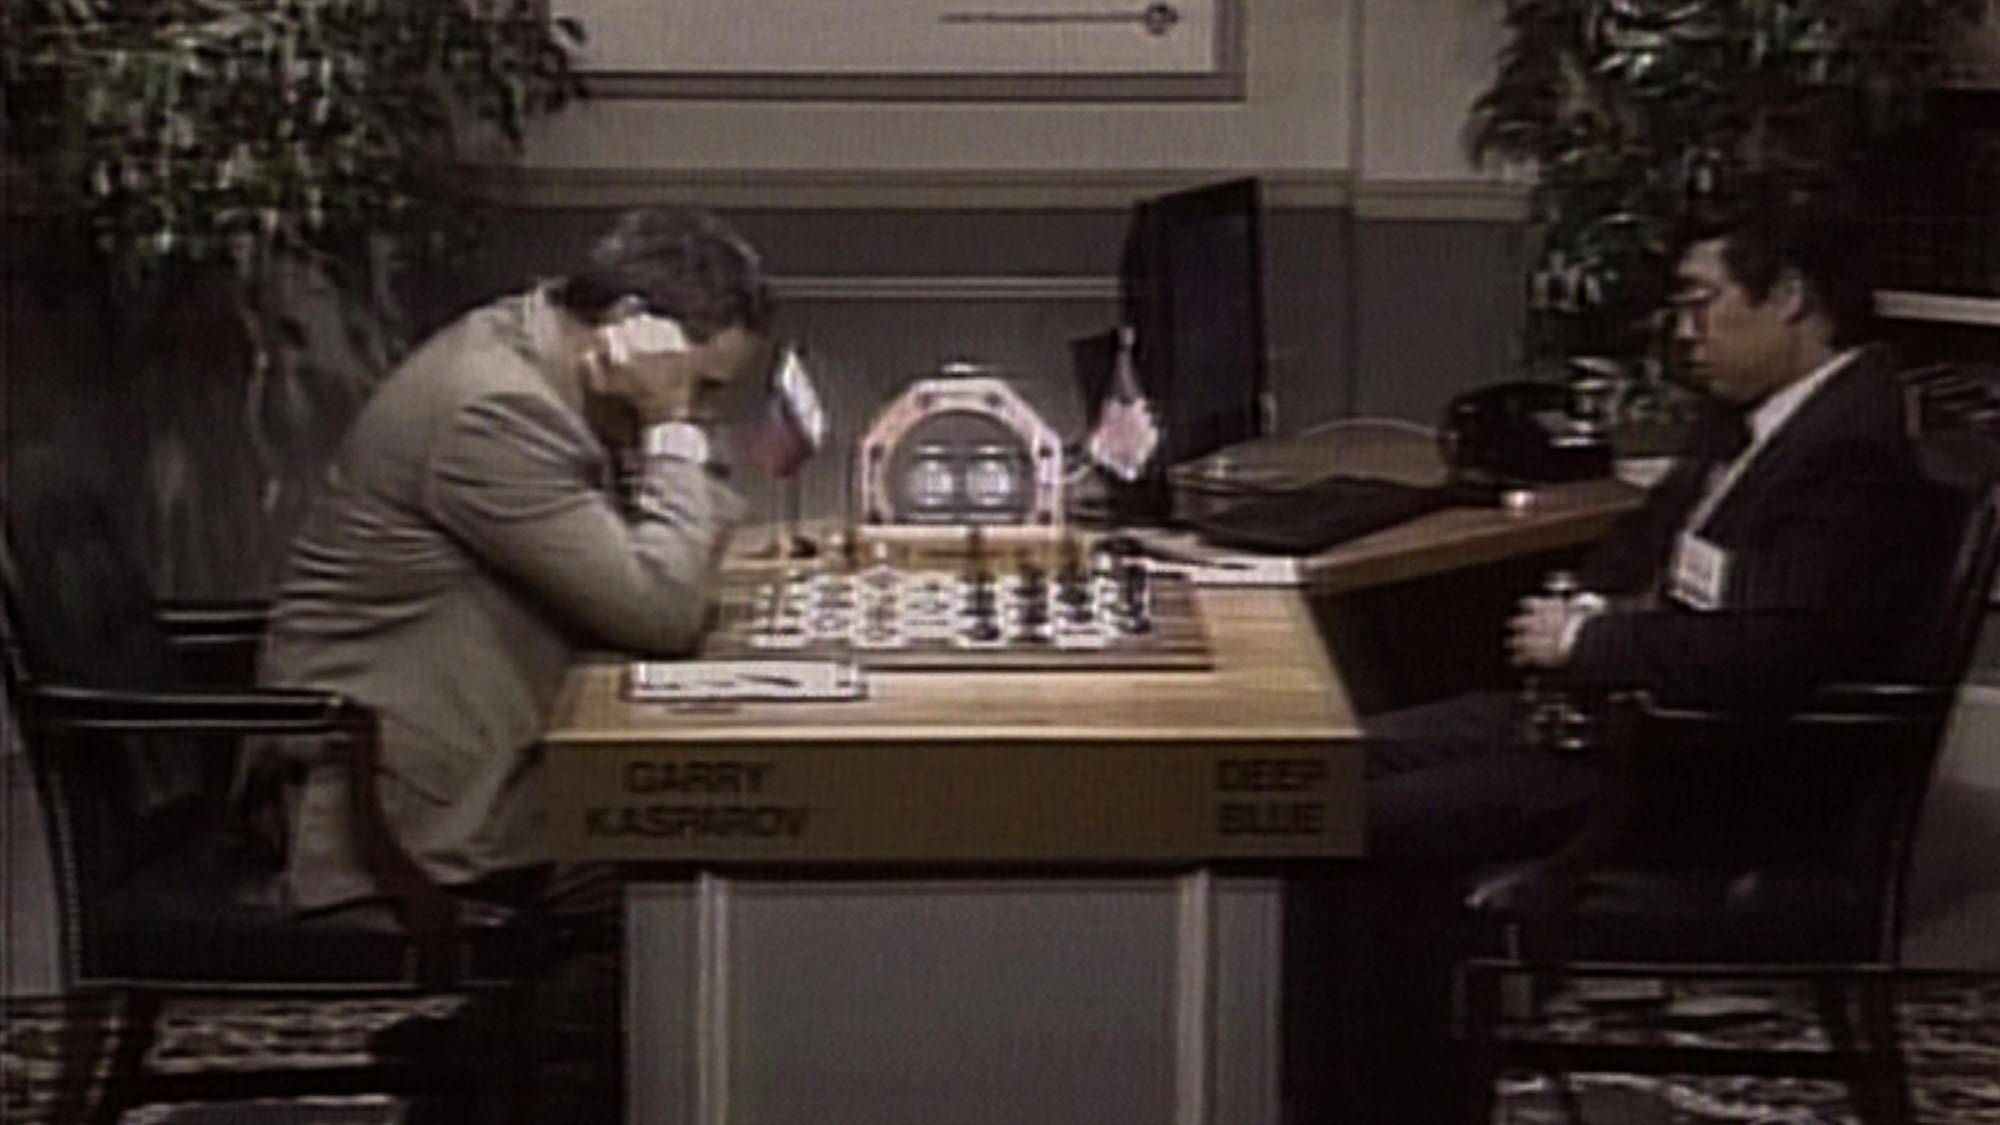 Man vs. machine: The 1997 chess game that brought AI into view